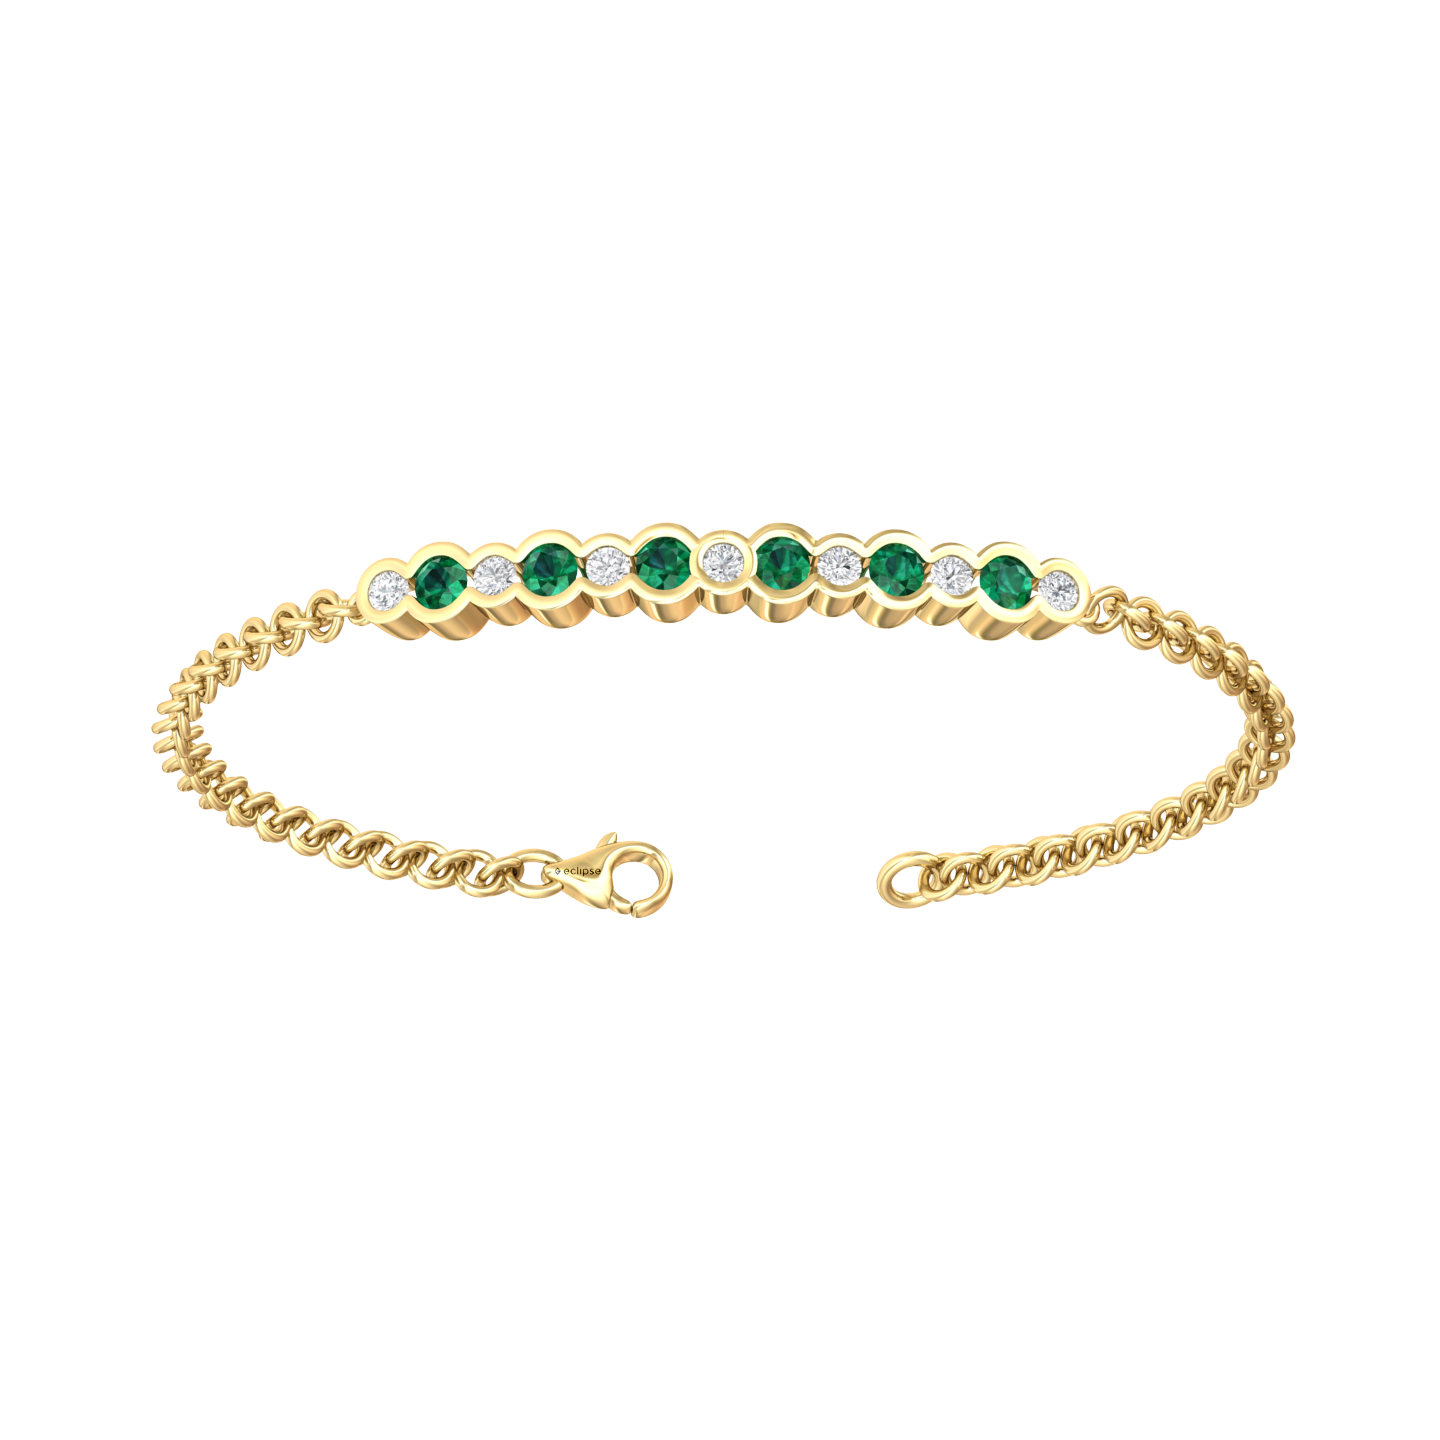 Eclipse Collection Emerald and Diamond Bracelet  Gardiner Brothers   